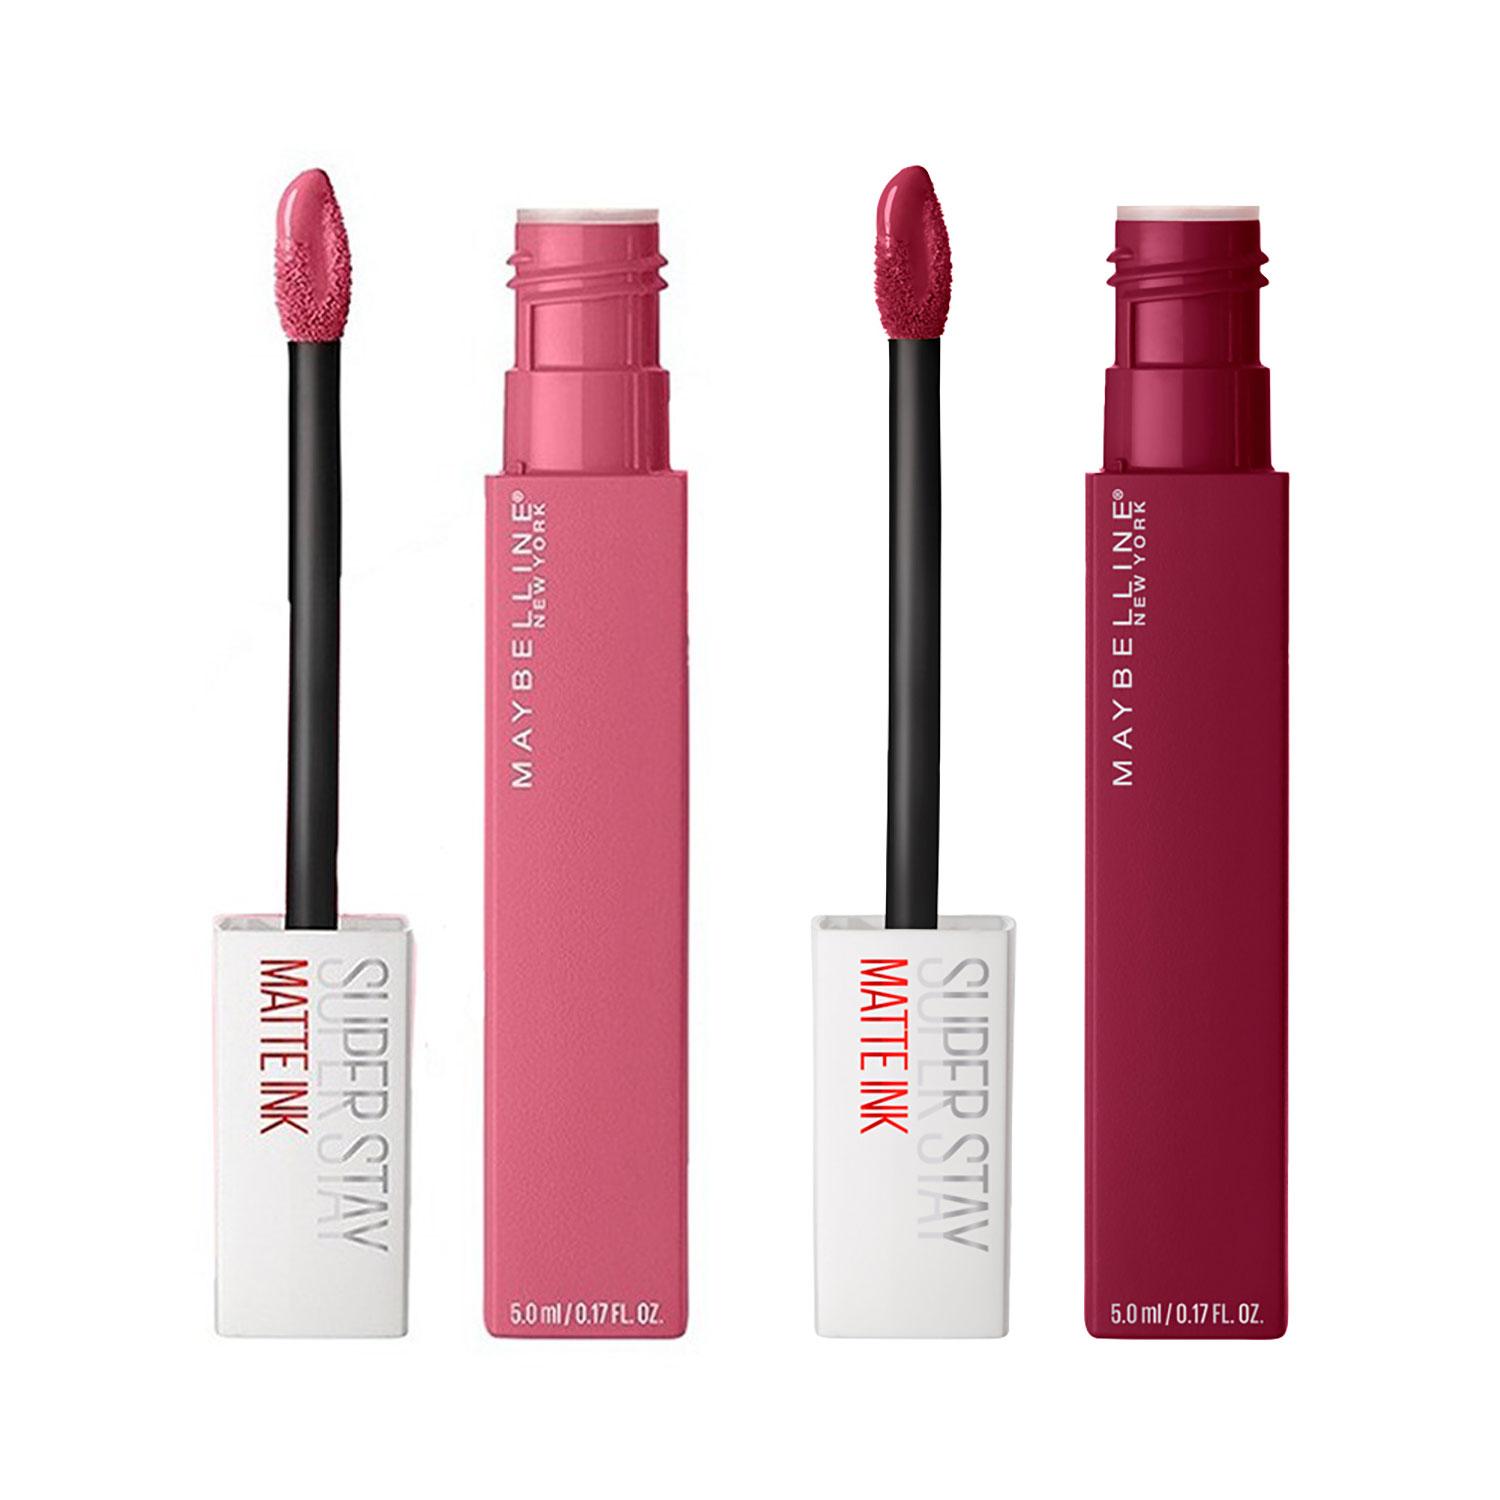 Maybelline New York | Maybelline New York Super Stay Matte Ink Liquid Lipstick Pack of 2 (Shades 115 & 125)